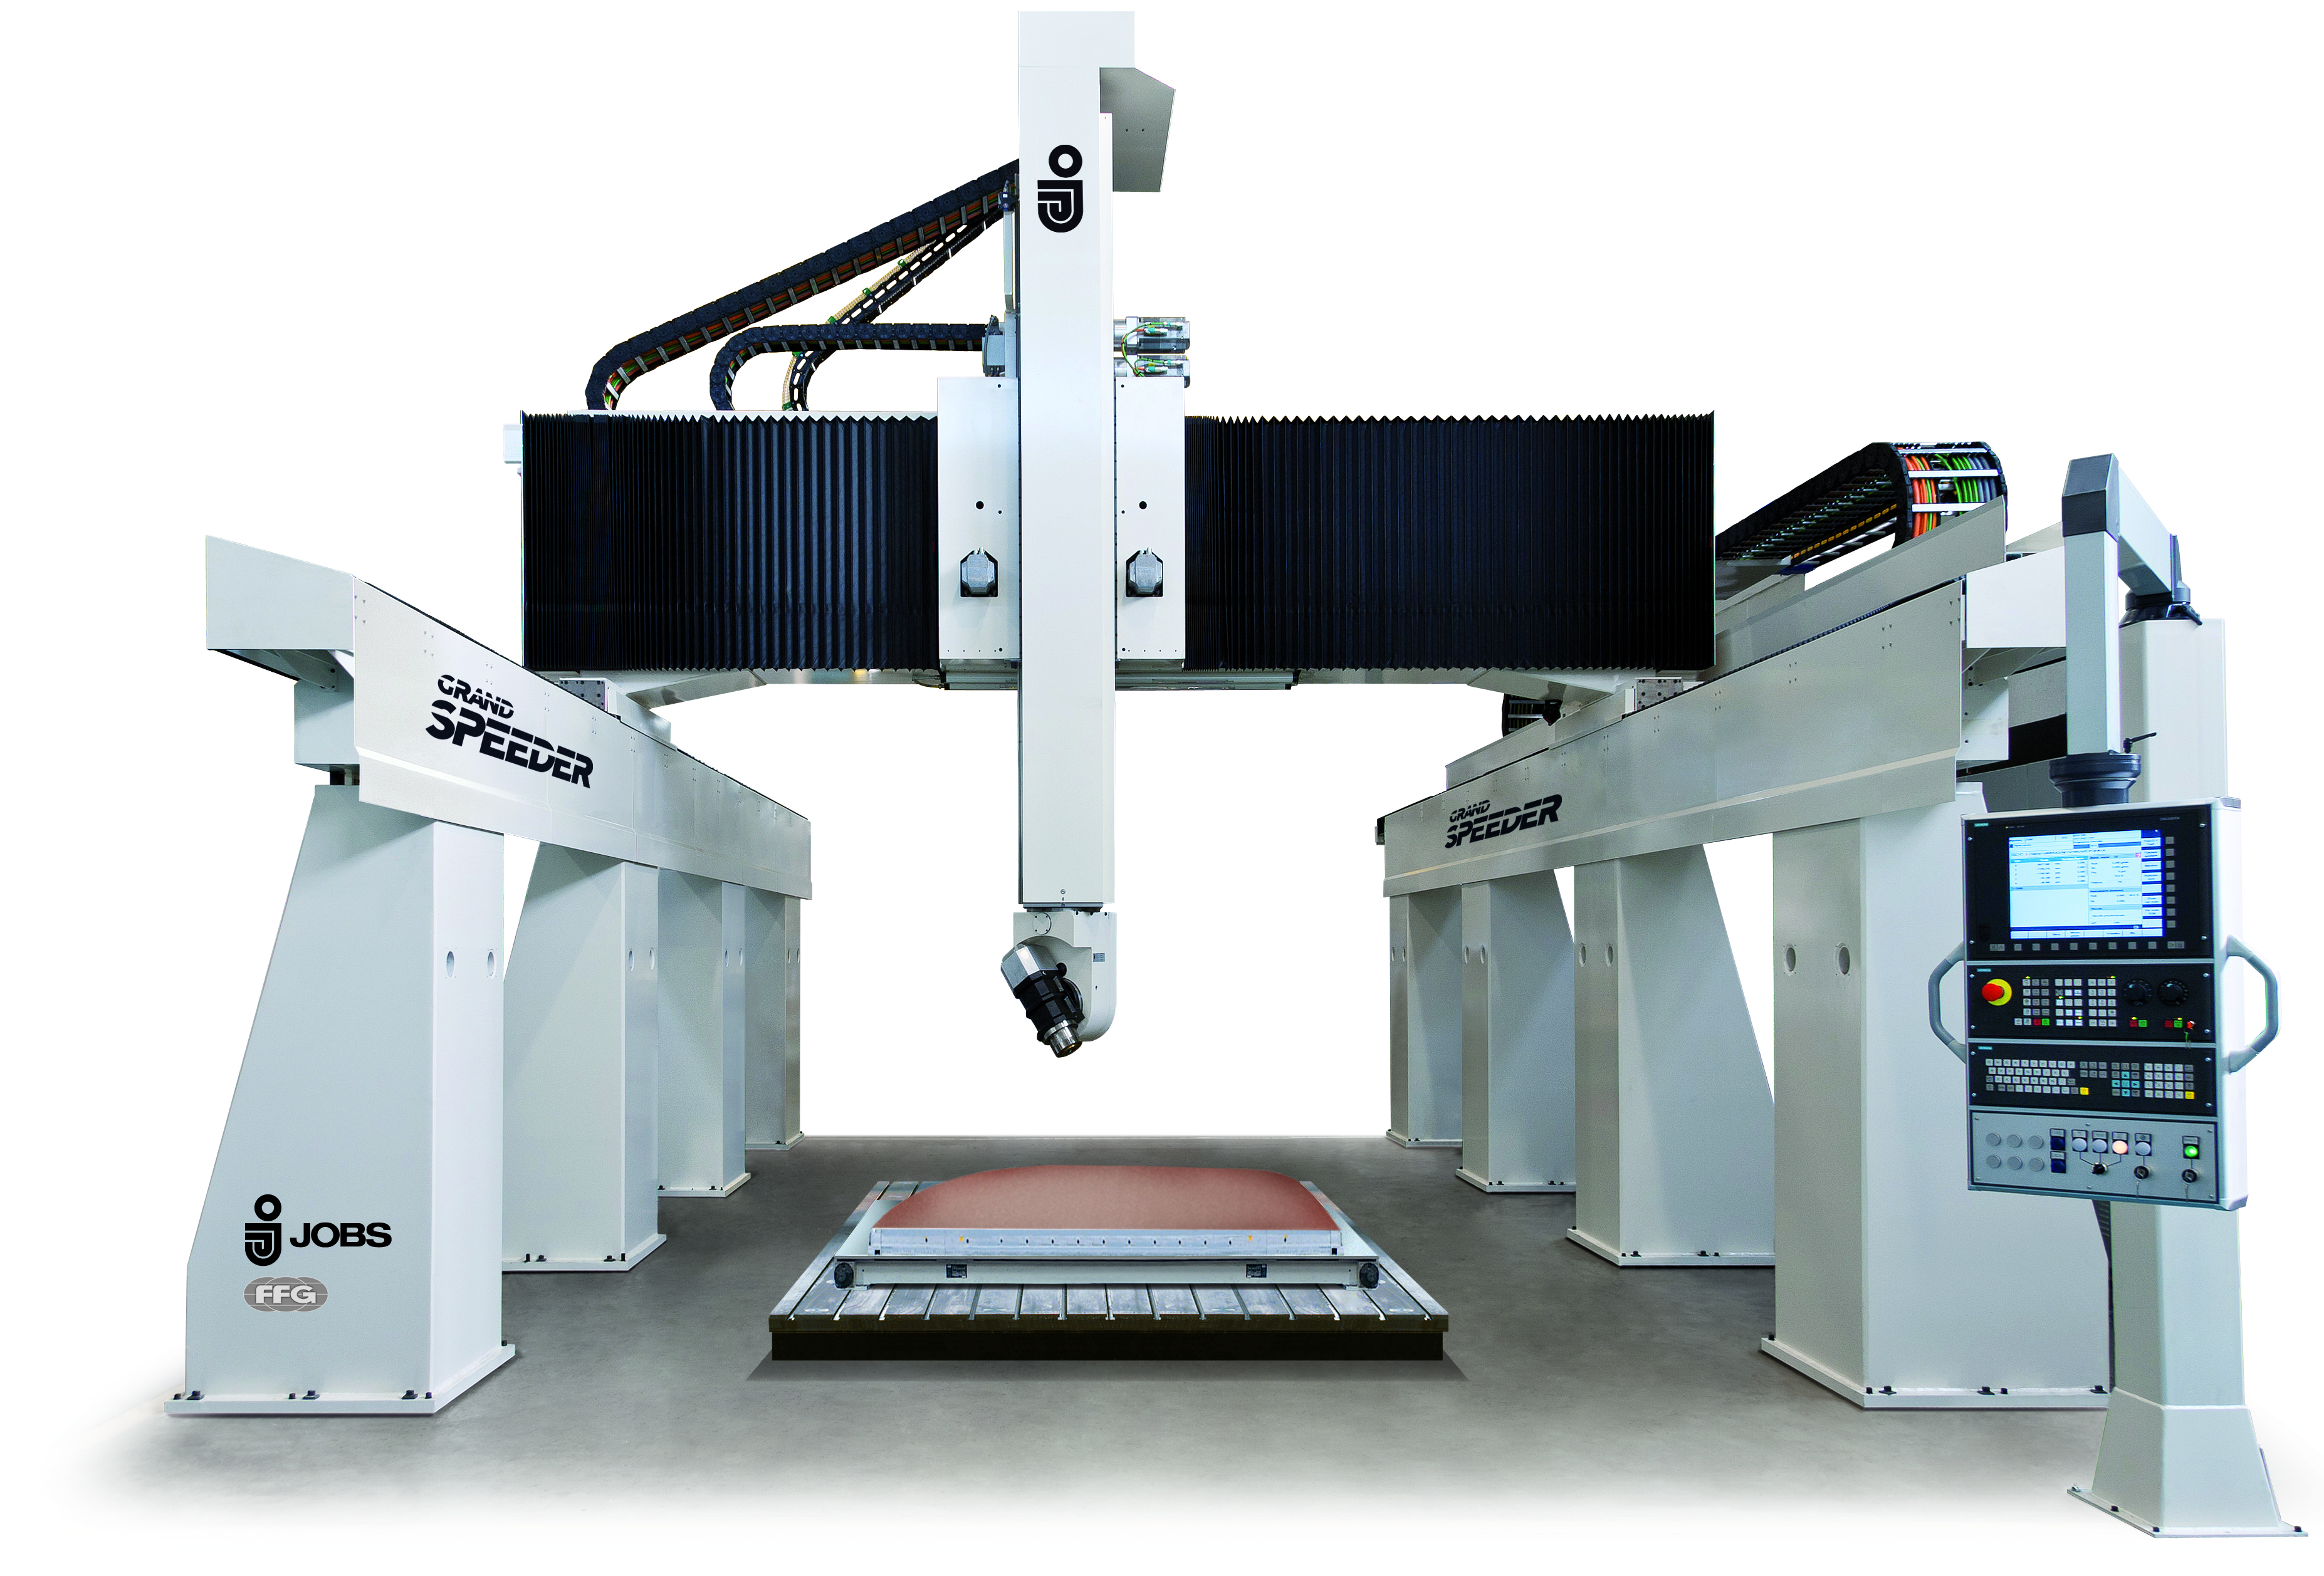 Jobs GRAND SPEEDER, 5-axis gantry milling machine for composite and non-tough materials machining